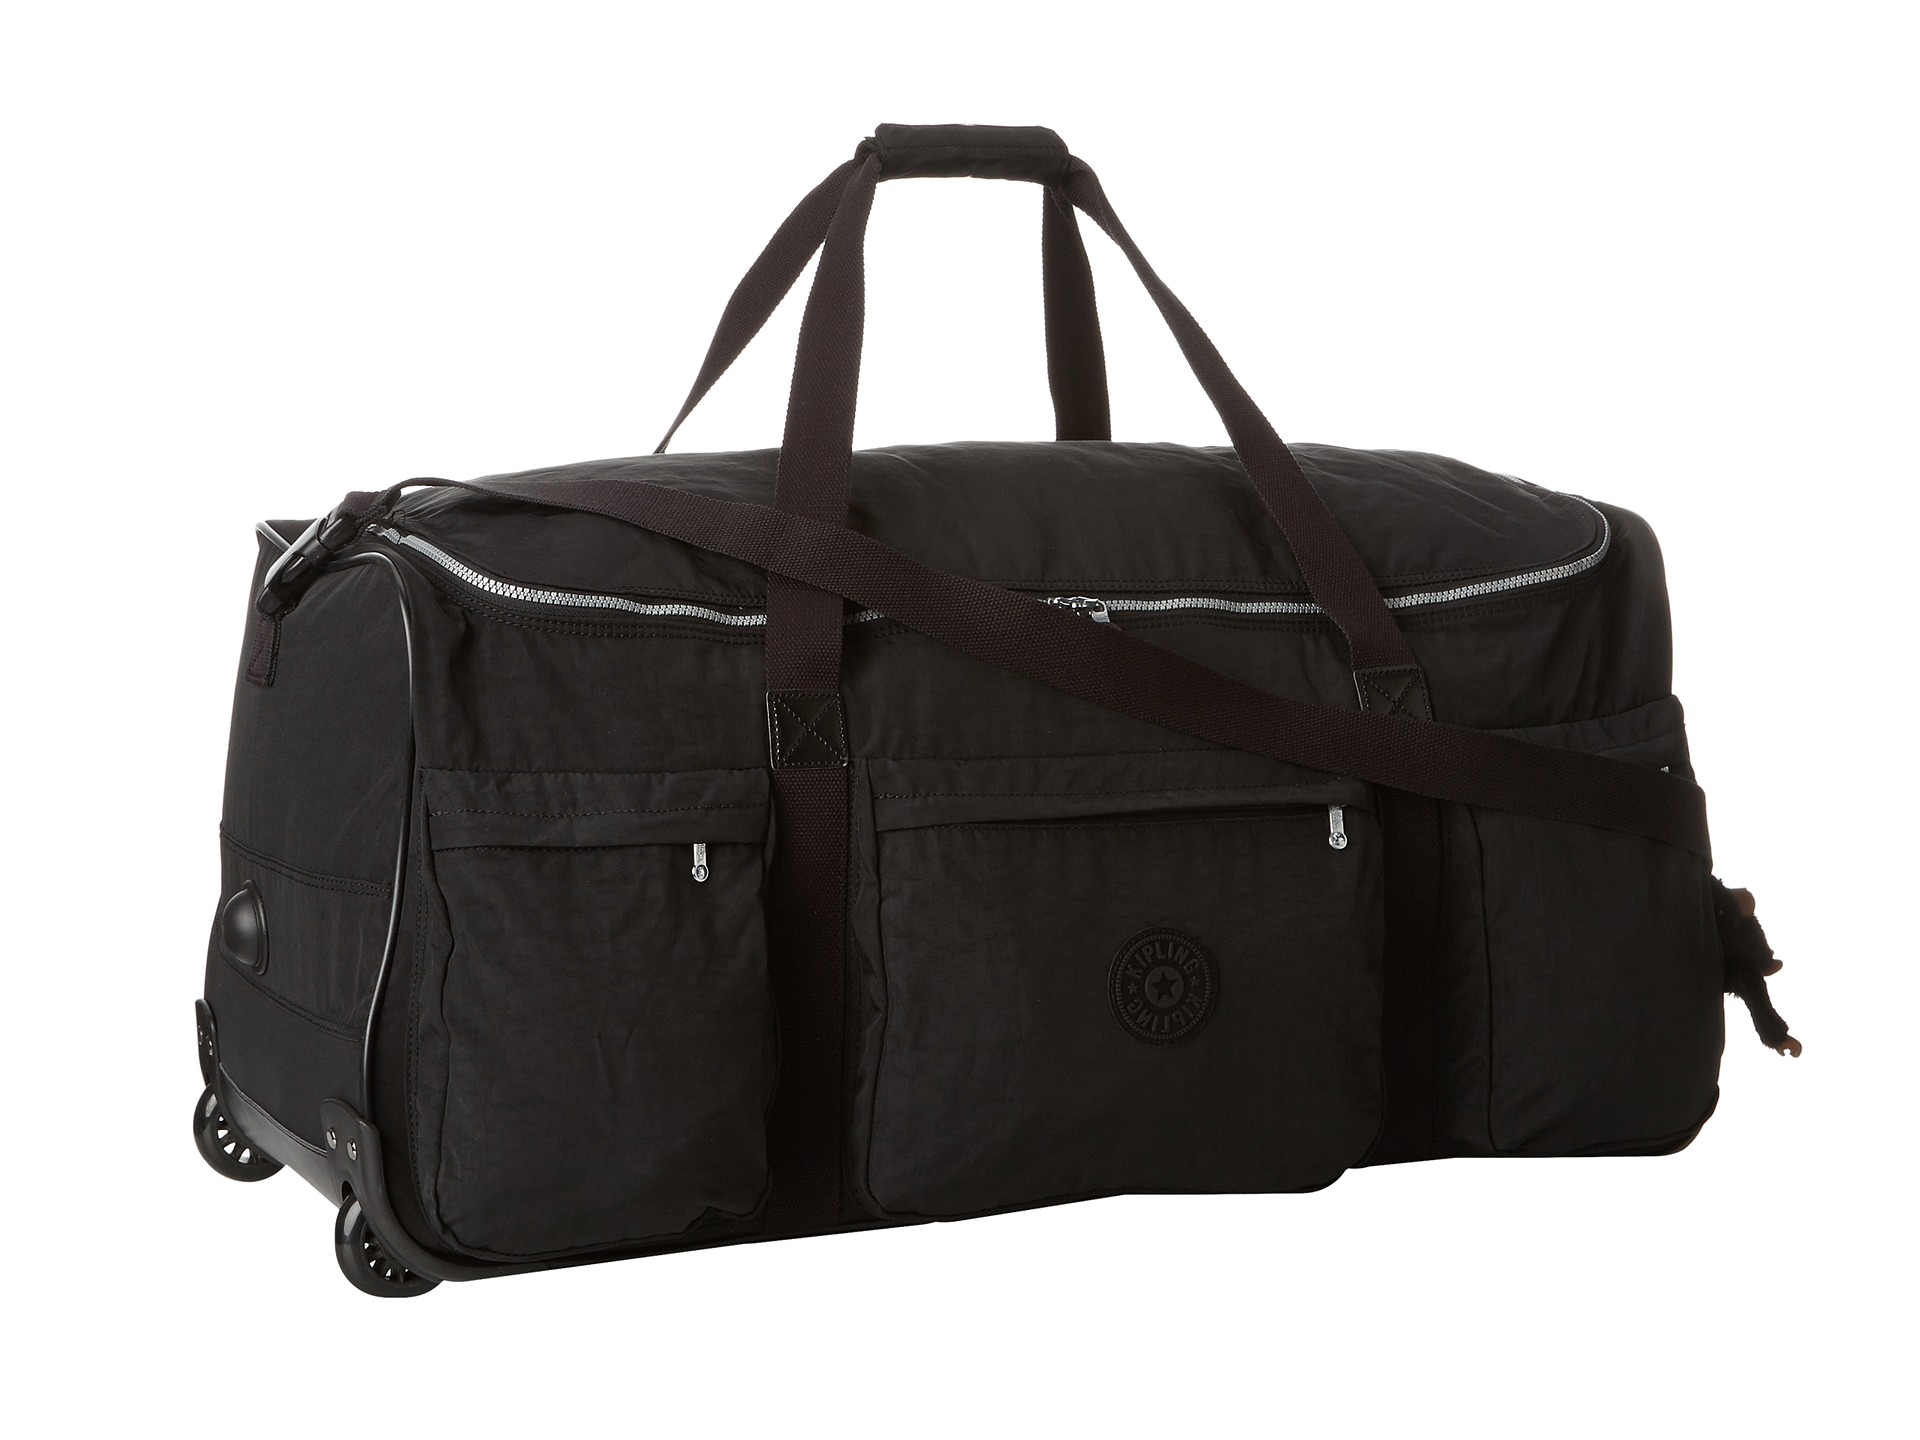 Kipling Discover Large Wheeled Luggage Duffle at www.bagssaleusa.com/louis-vuitton/